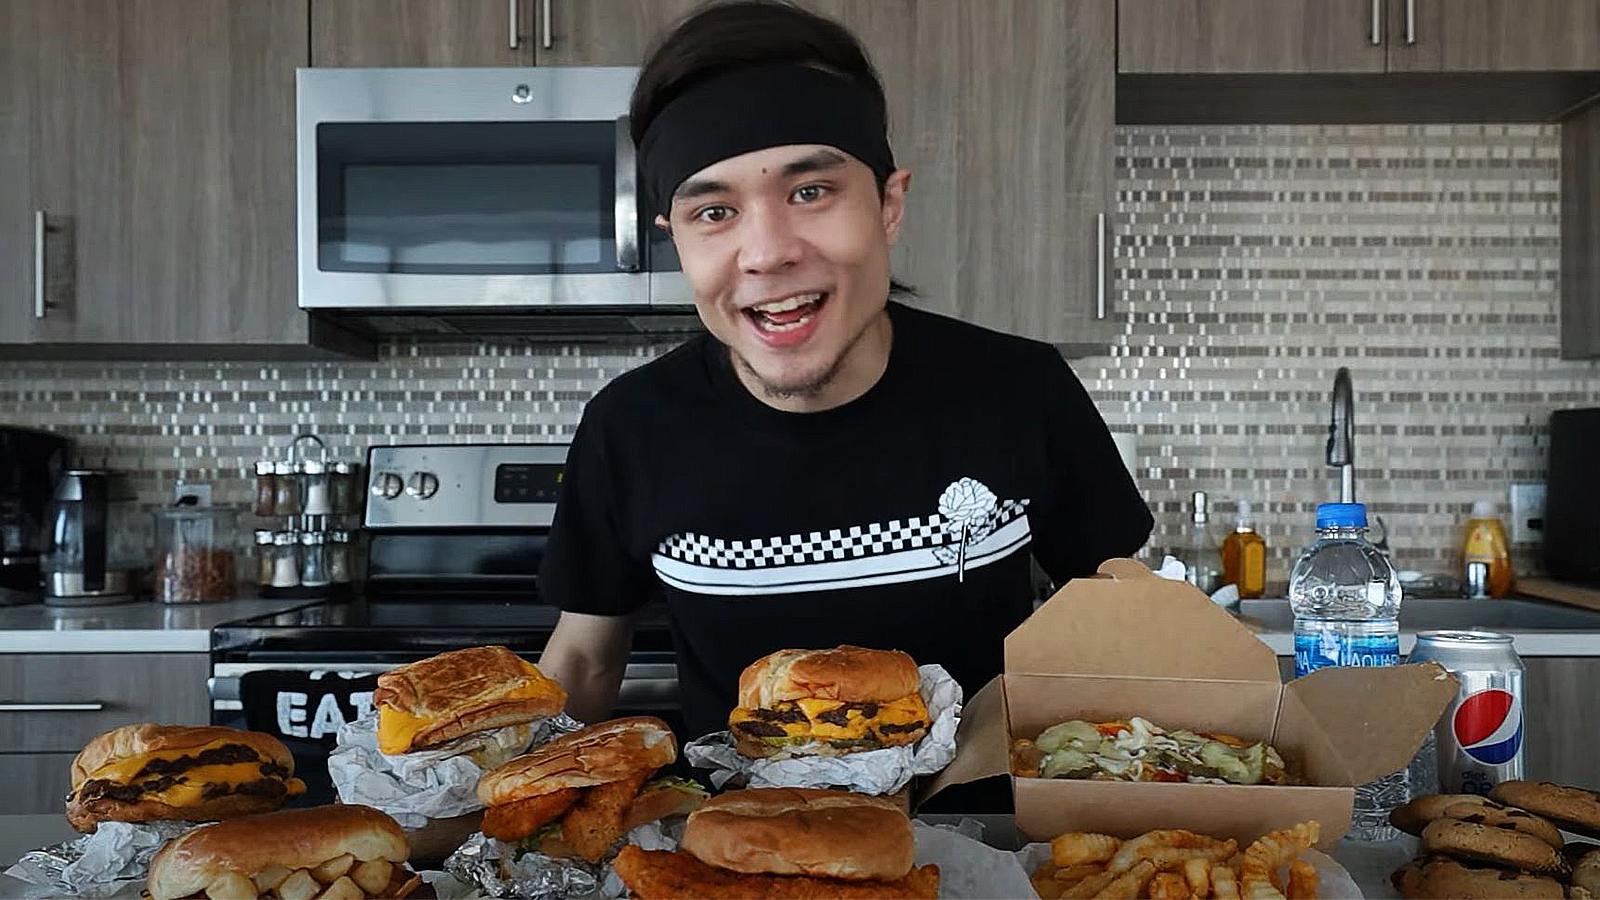 Trying MrBeast Burger's ENTIRE 2022 Menu! Is it even good? 